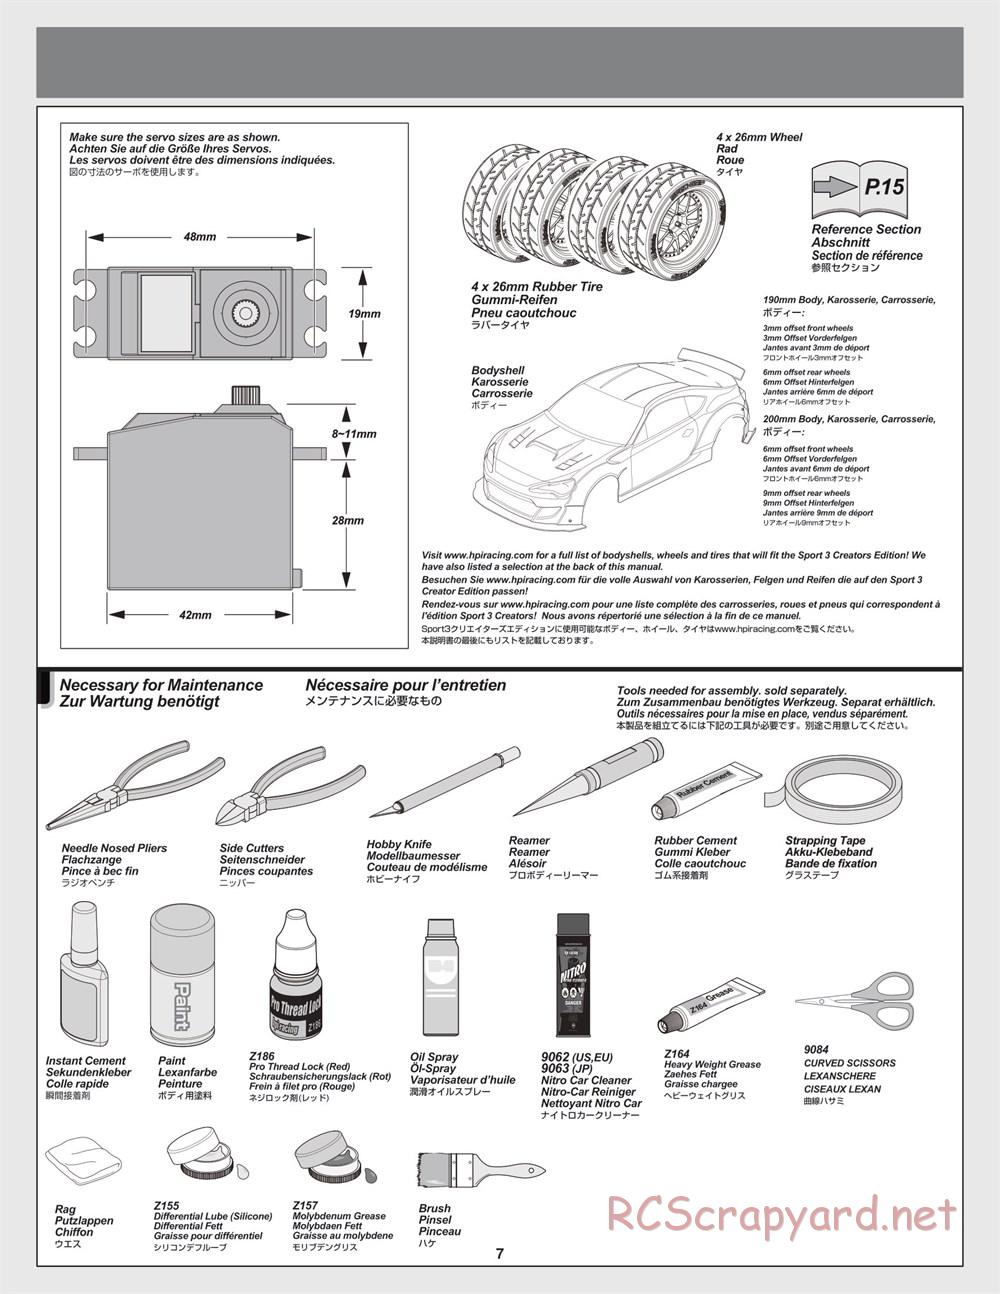 HPI - RS4 Sport 3 - Creator Edition - Manual - Page 7